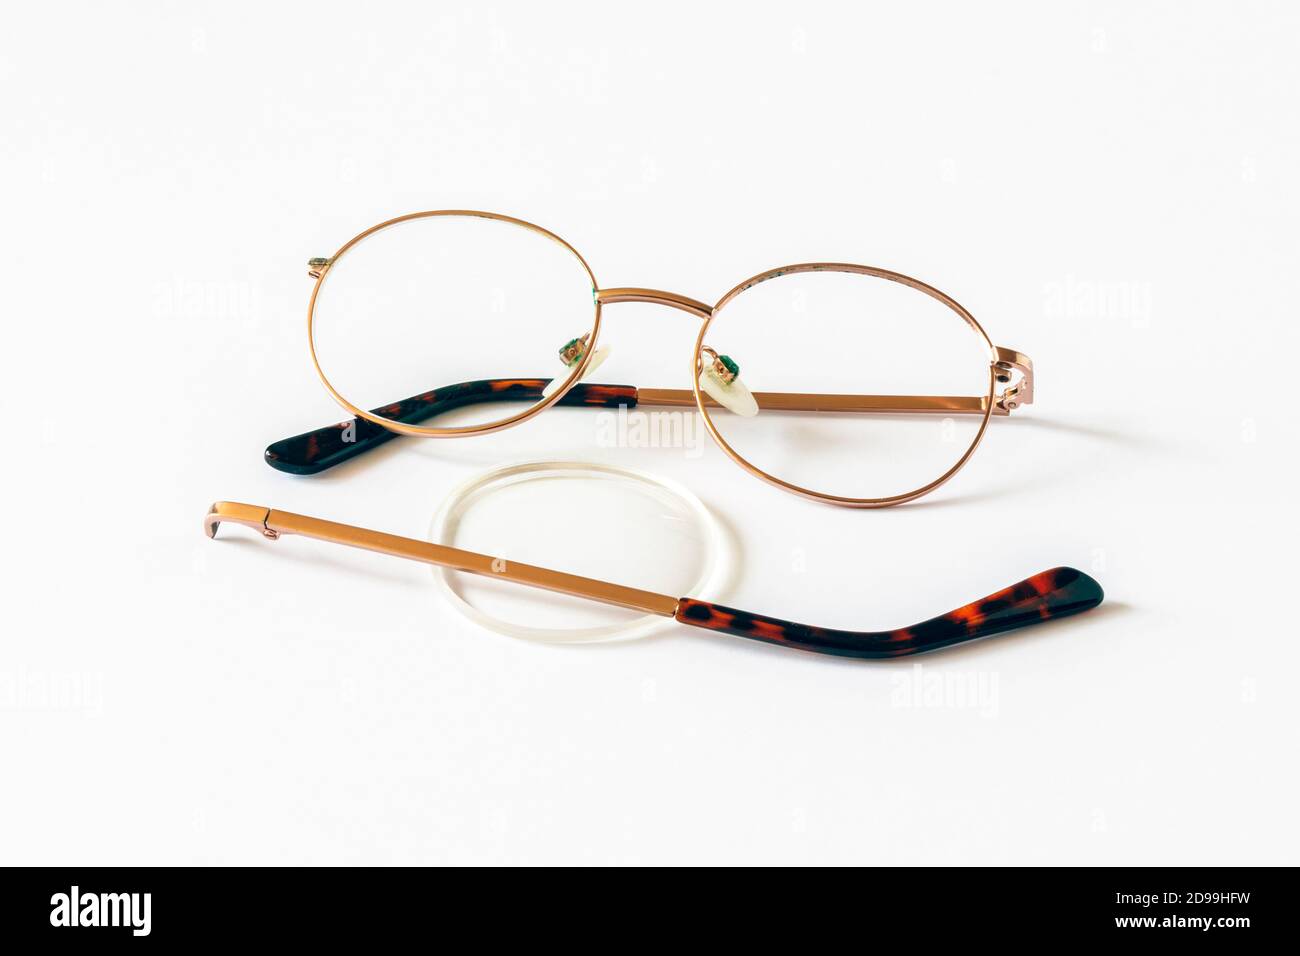 A broken pair of glasses on a white background Stock Photo